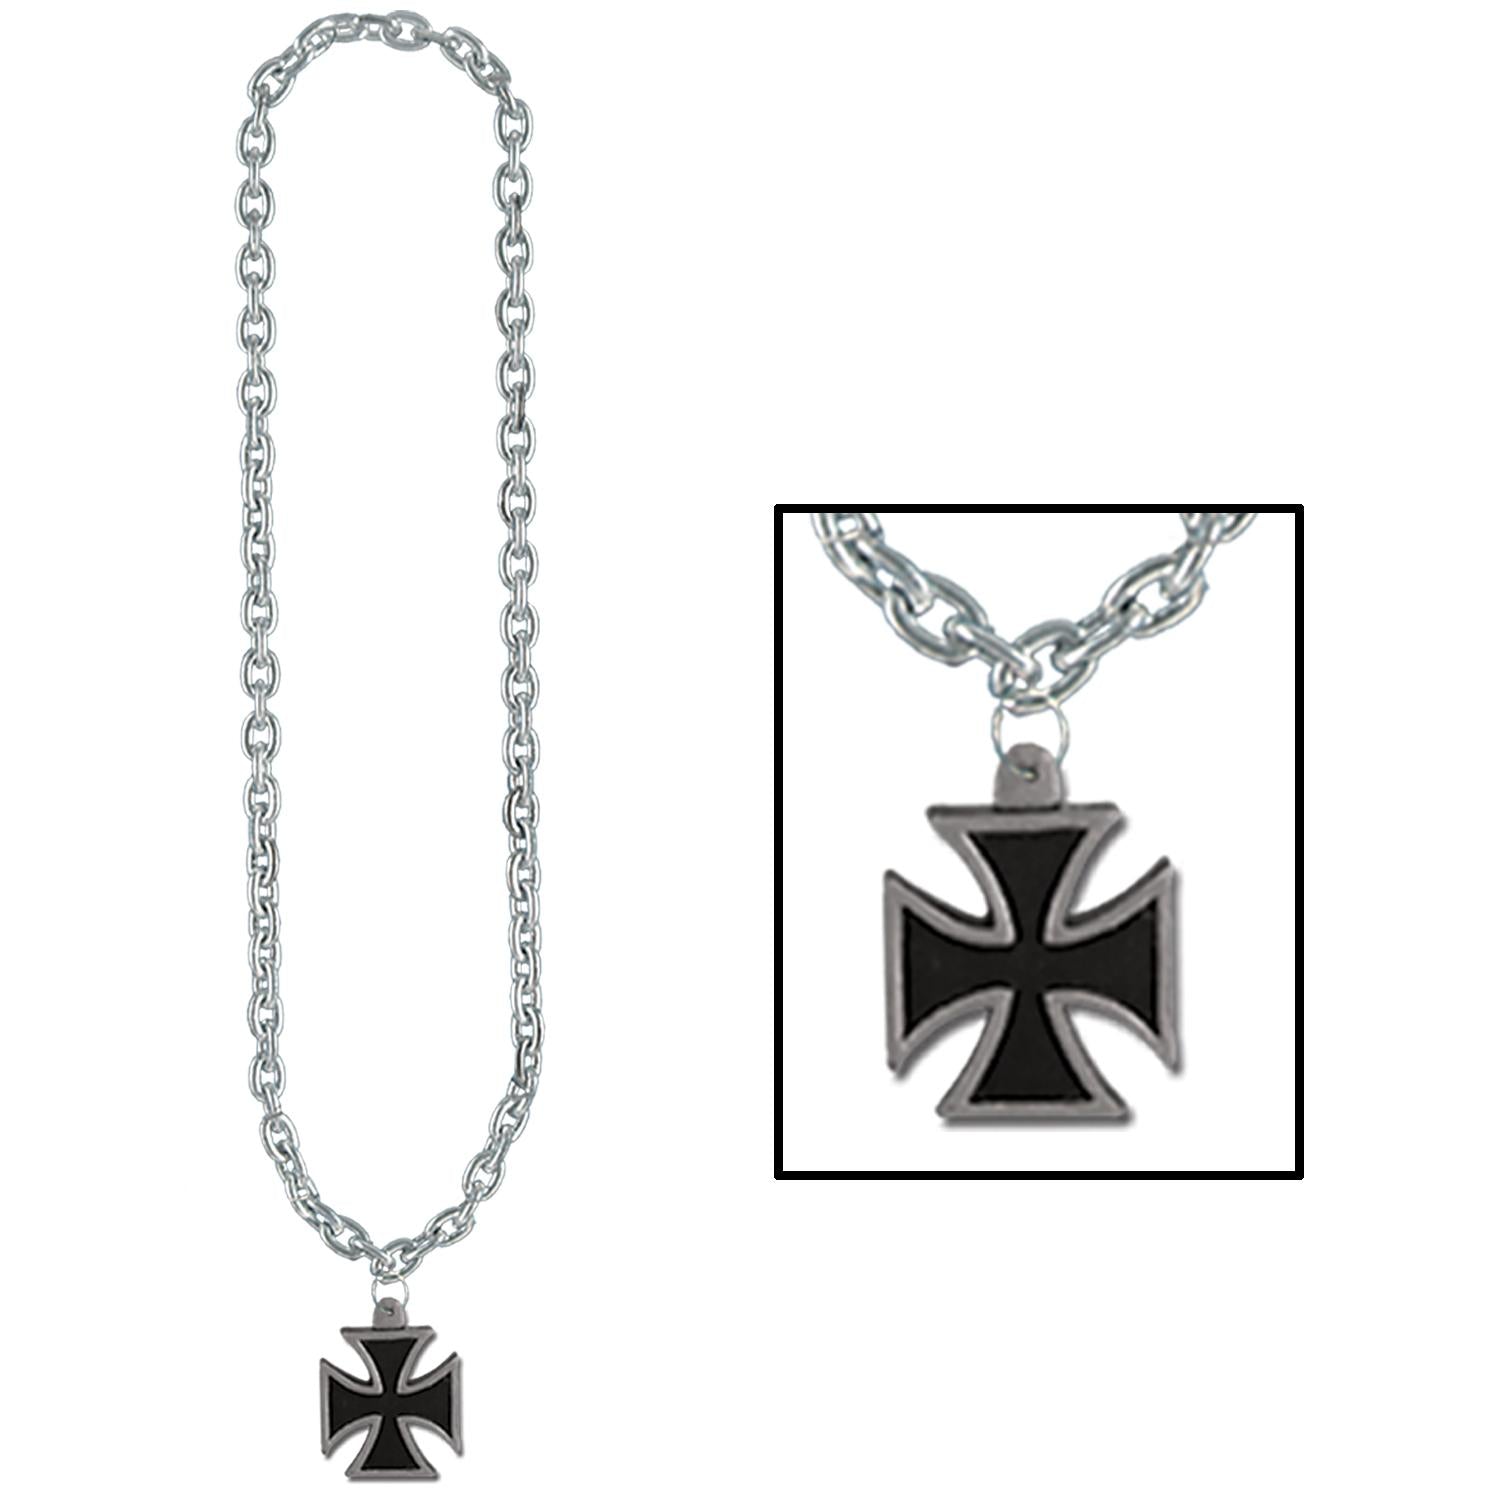 Beistle Chain Bead Necklaces with Iron Cross Medal